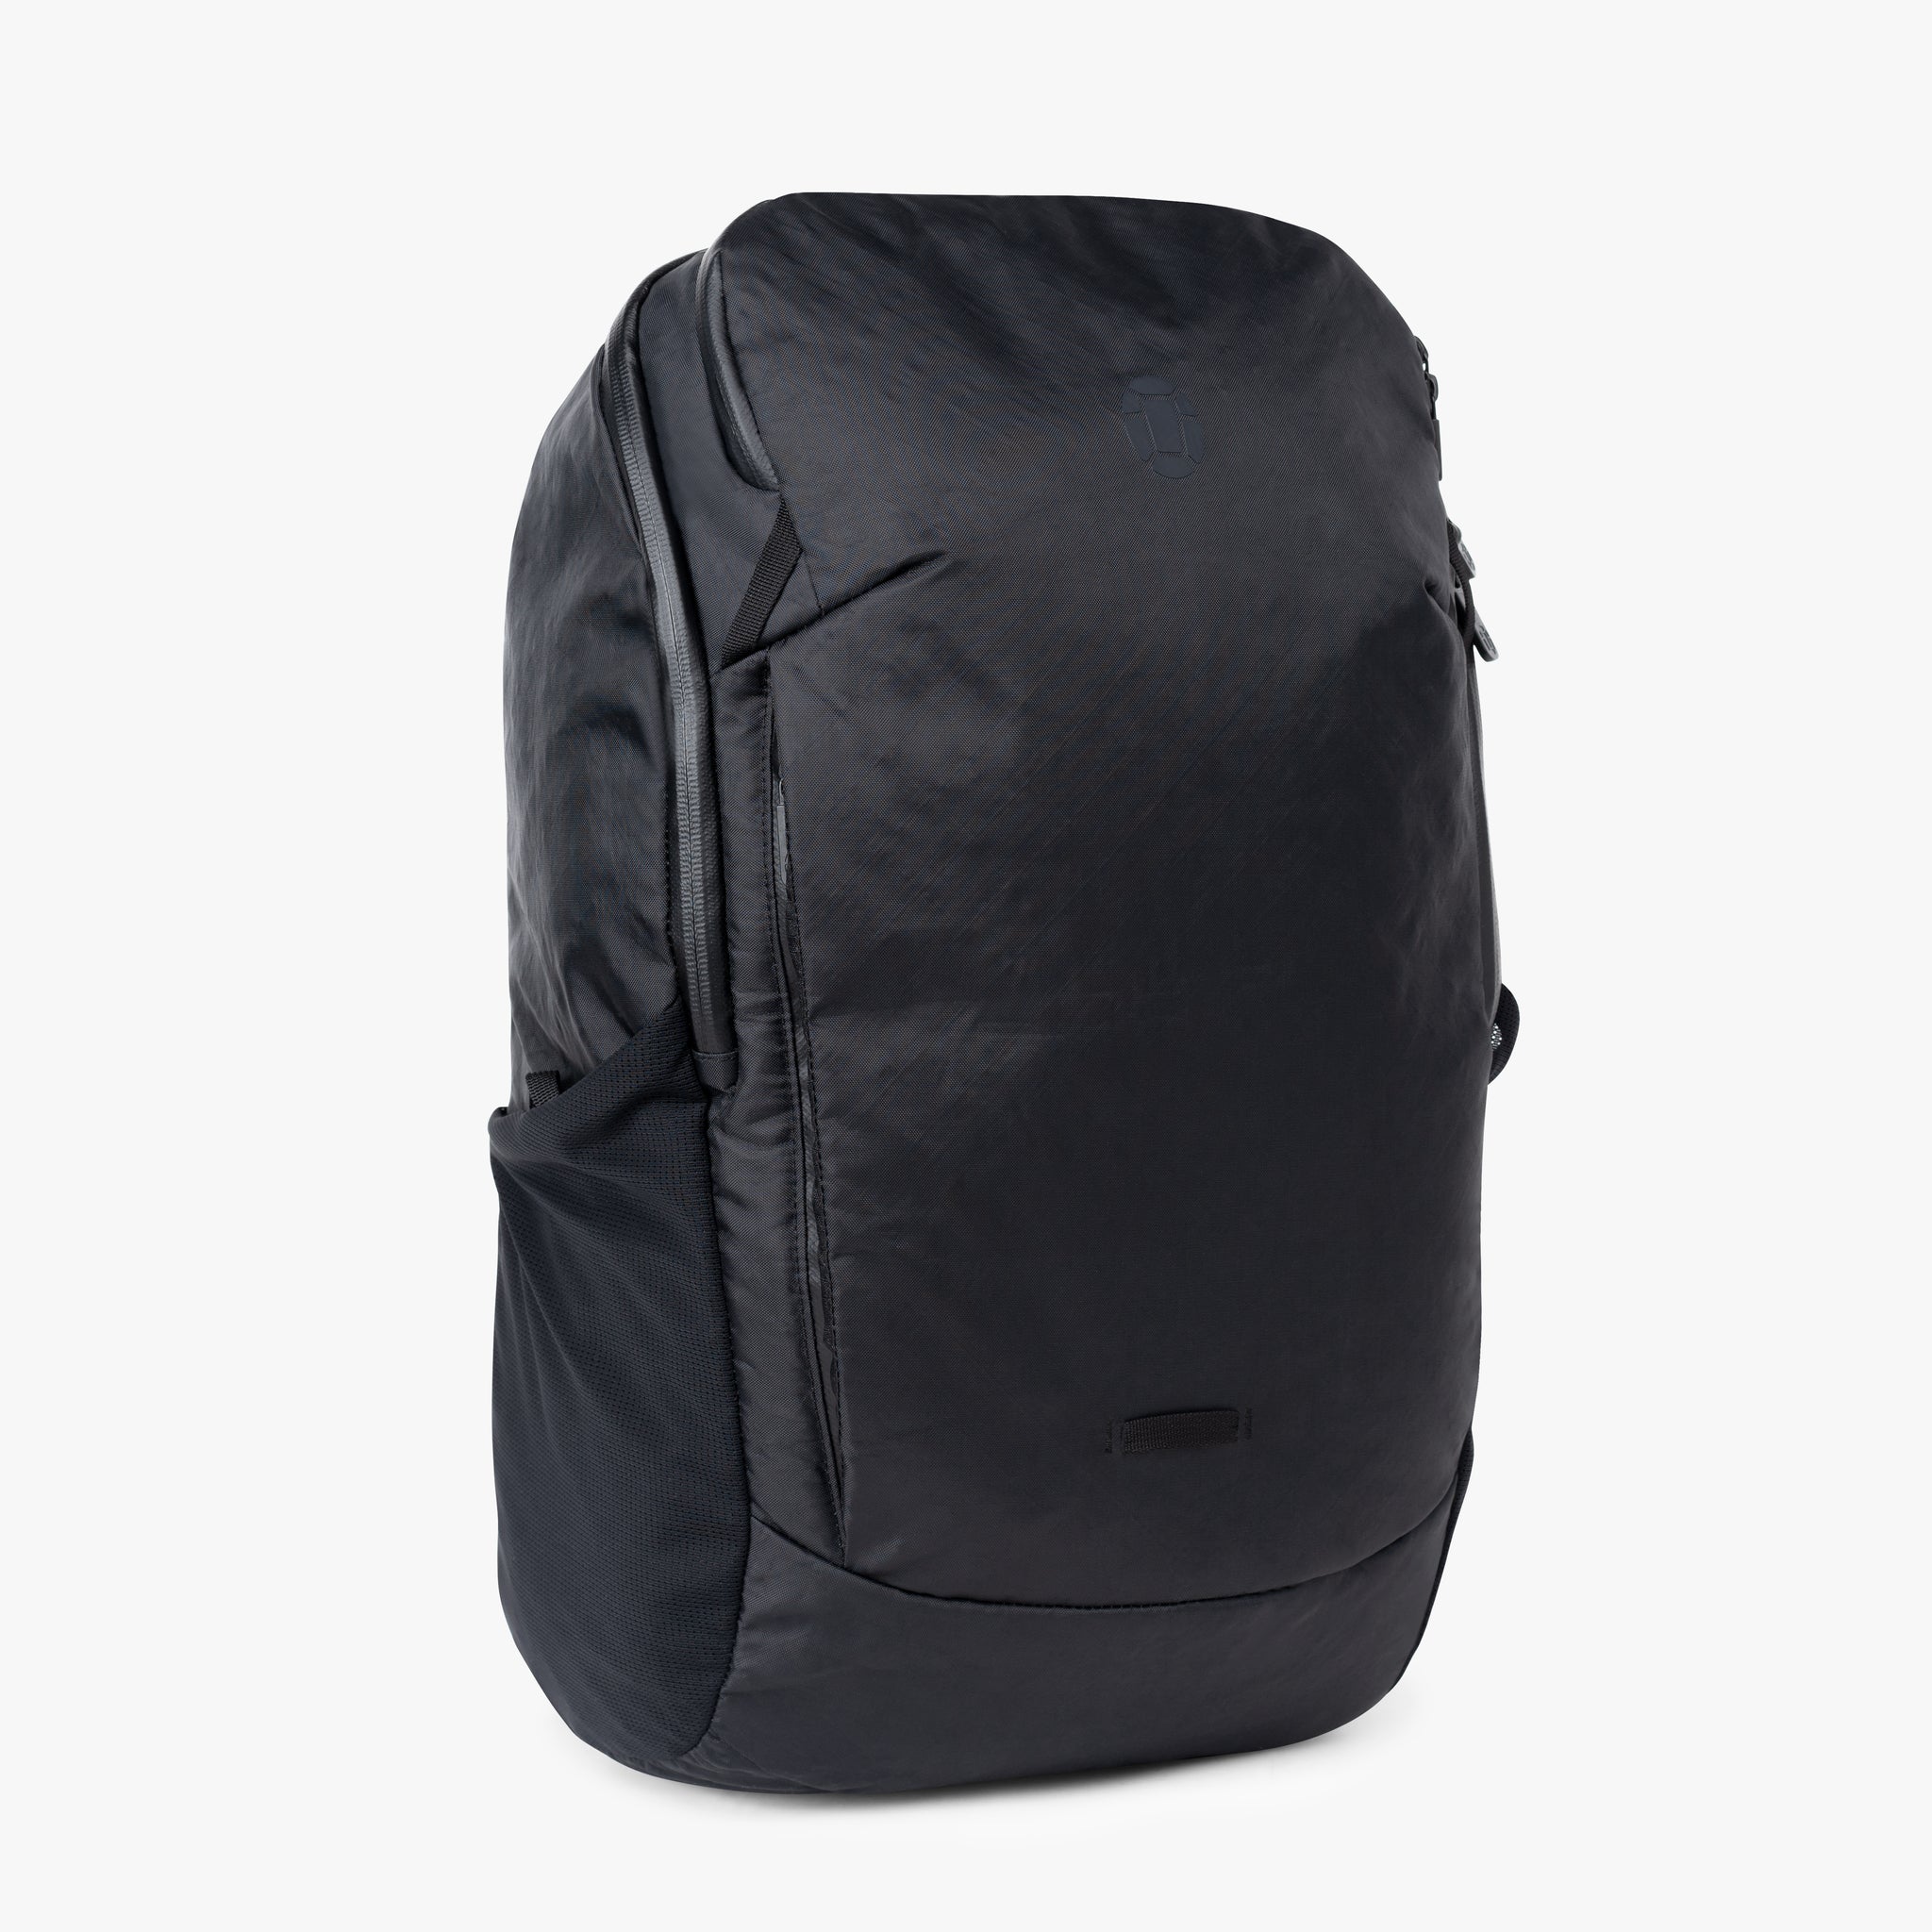 travel laptop backpack casual